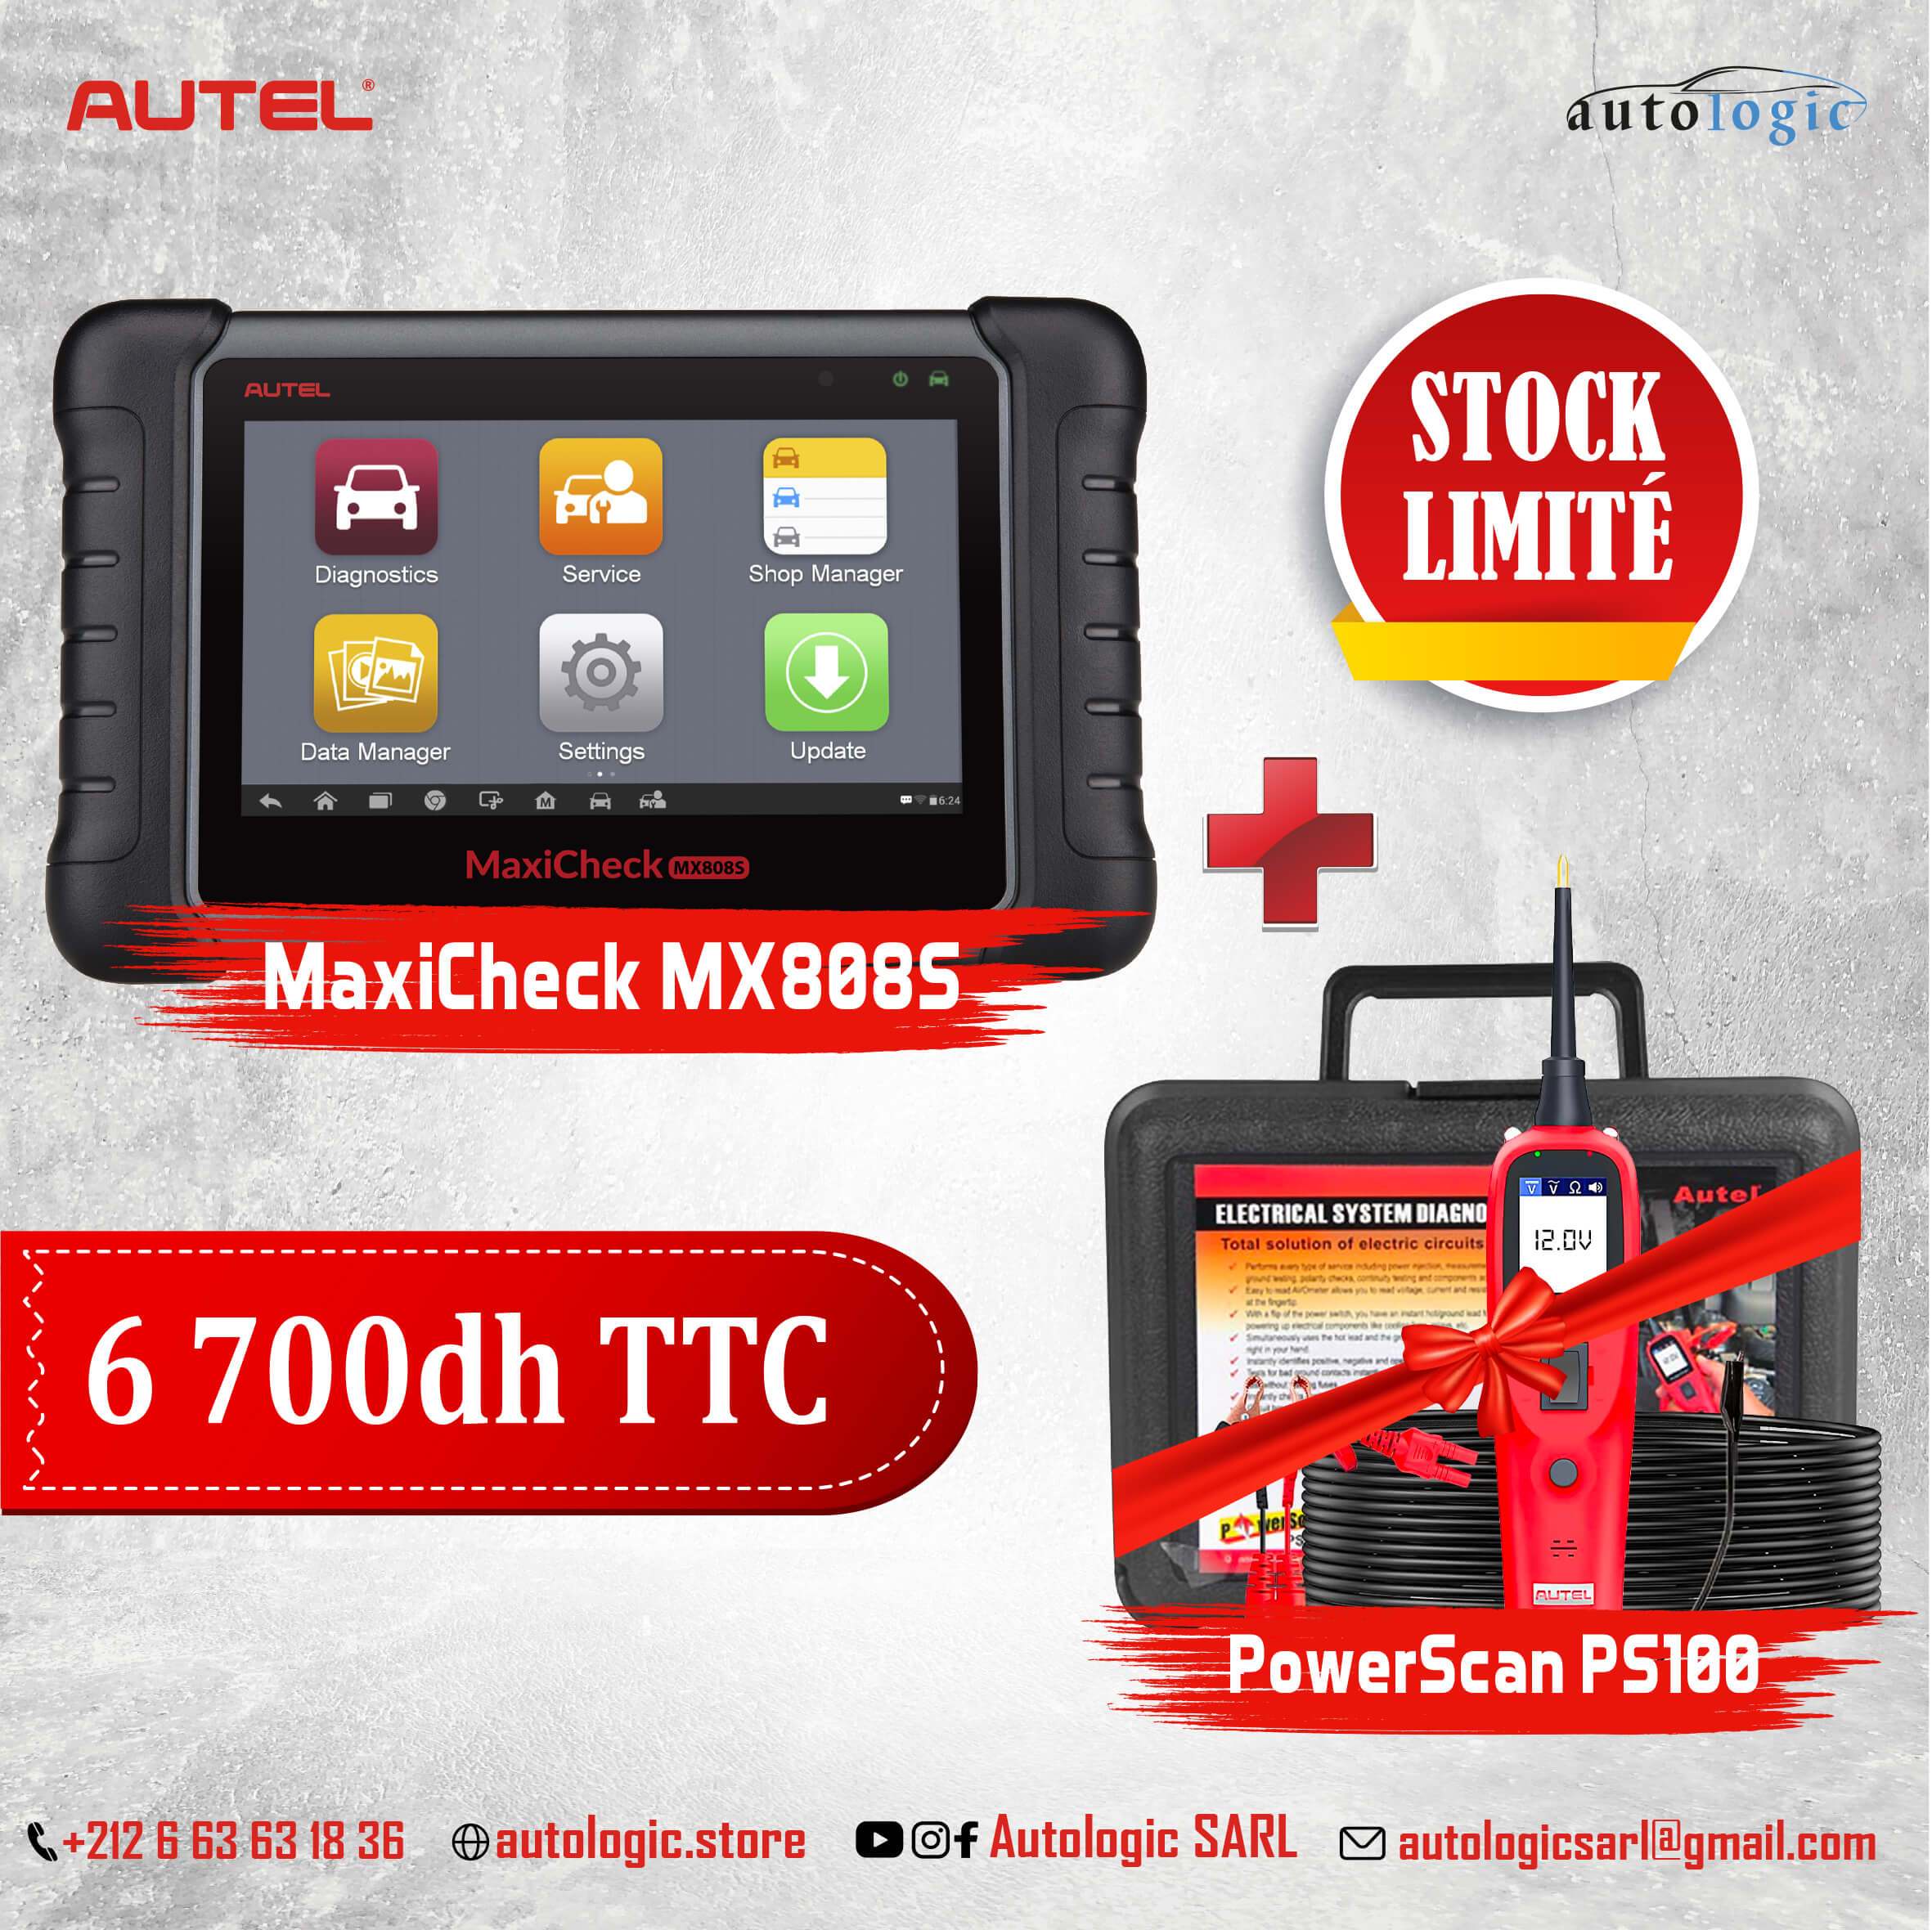 Autel MaxiCheck MX808 Full System Diagnostic Tool Newly Adds Active Test &  Battery Testing